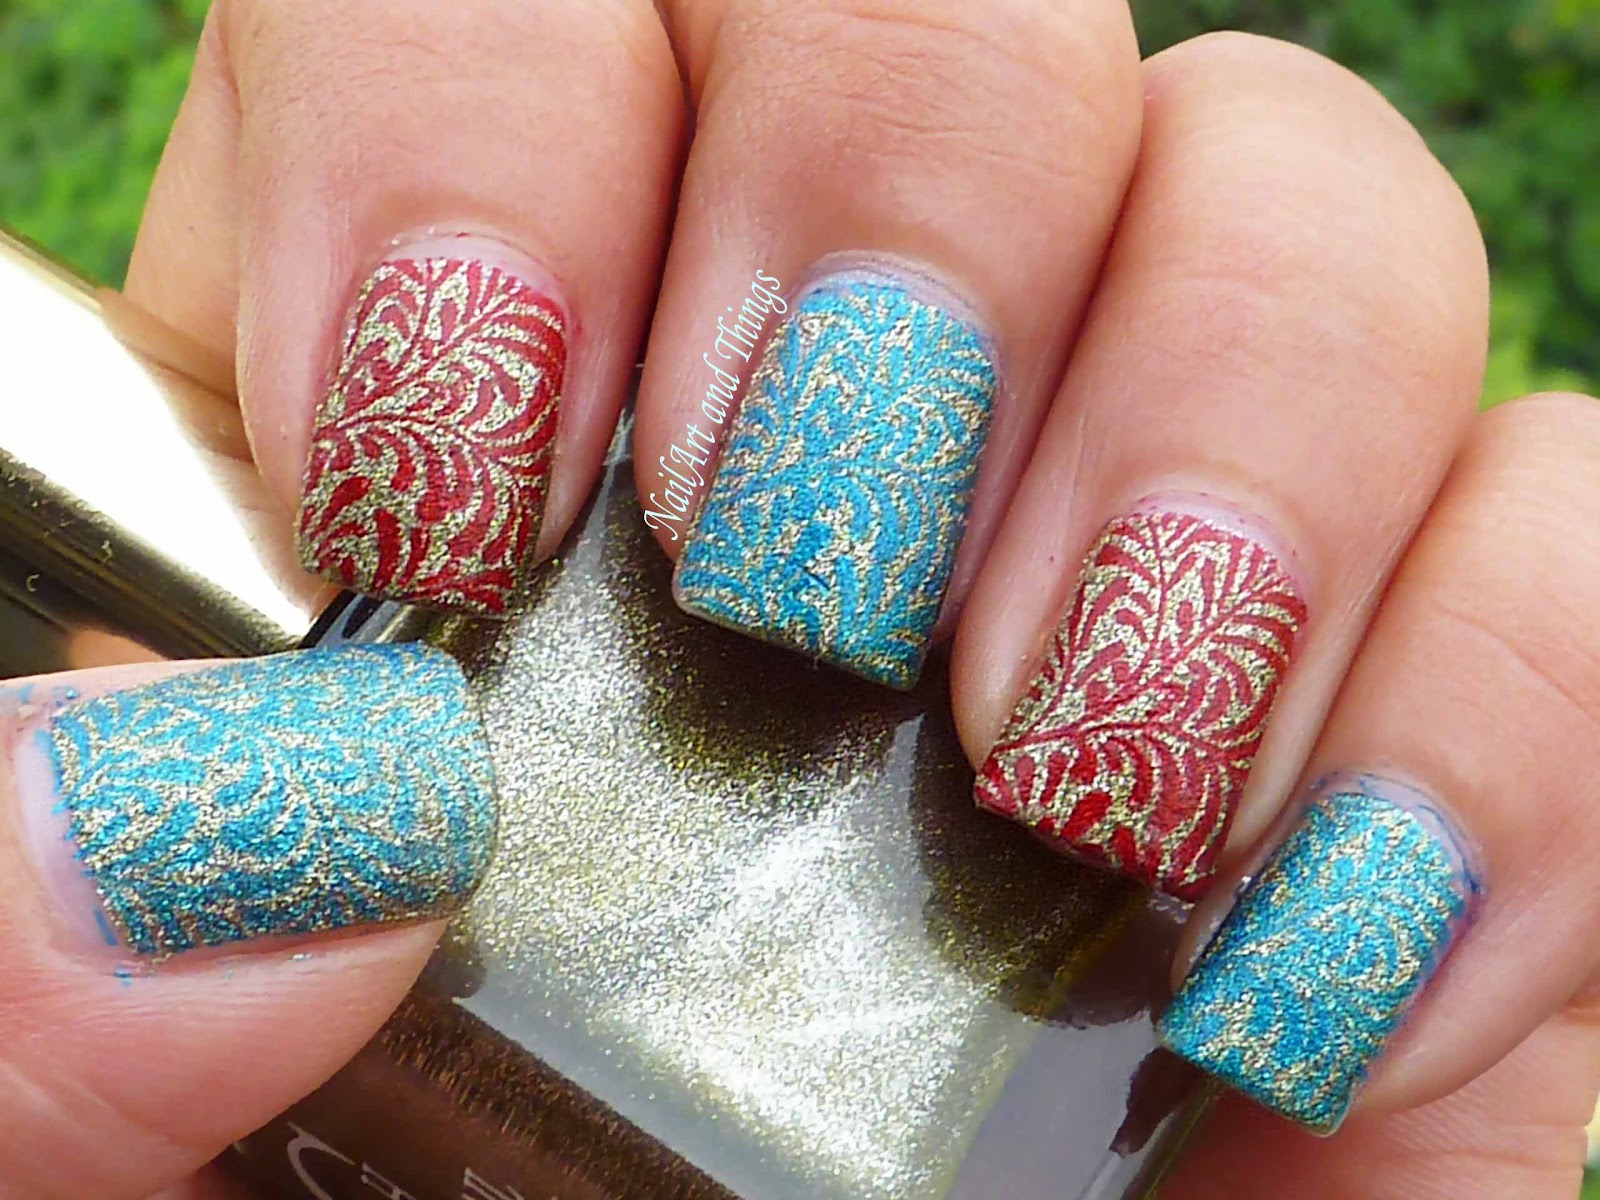 1. Troubleshooting Tips for Konad Nail Art Stamping - wide 2